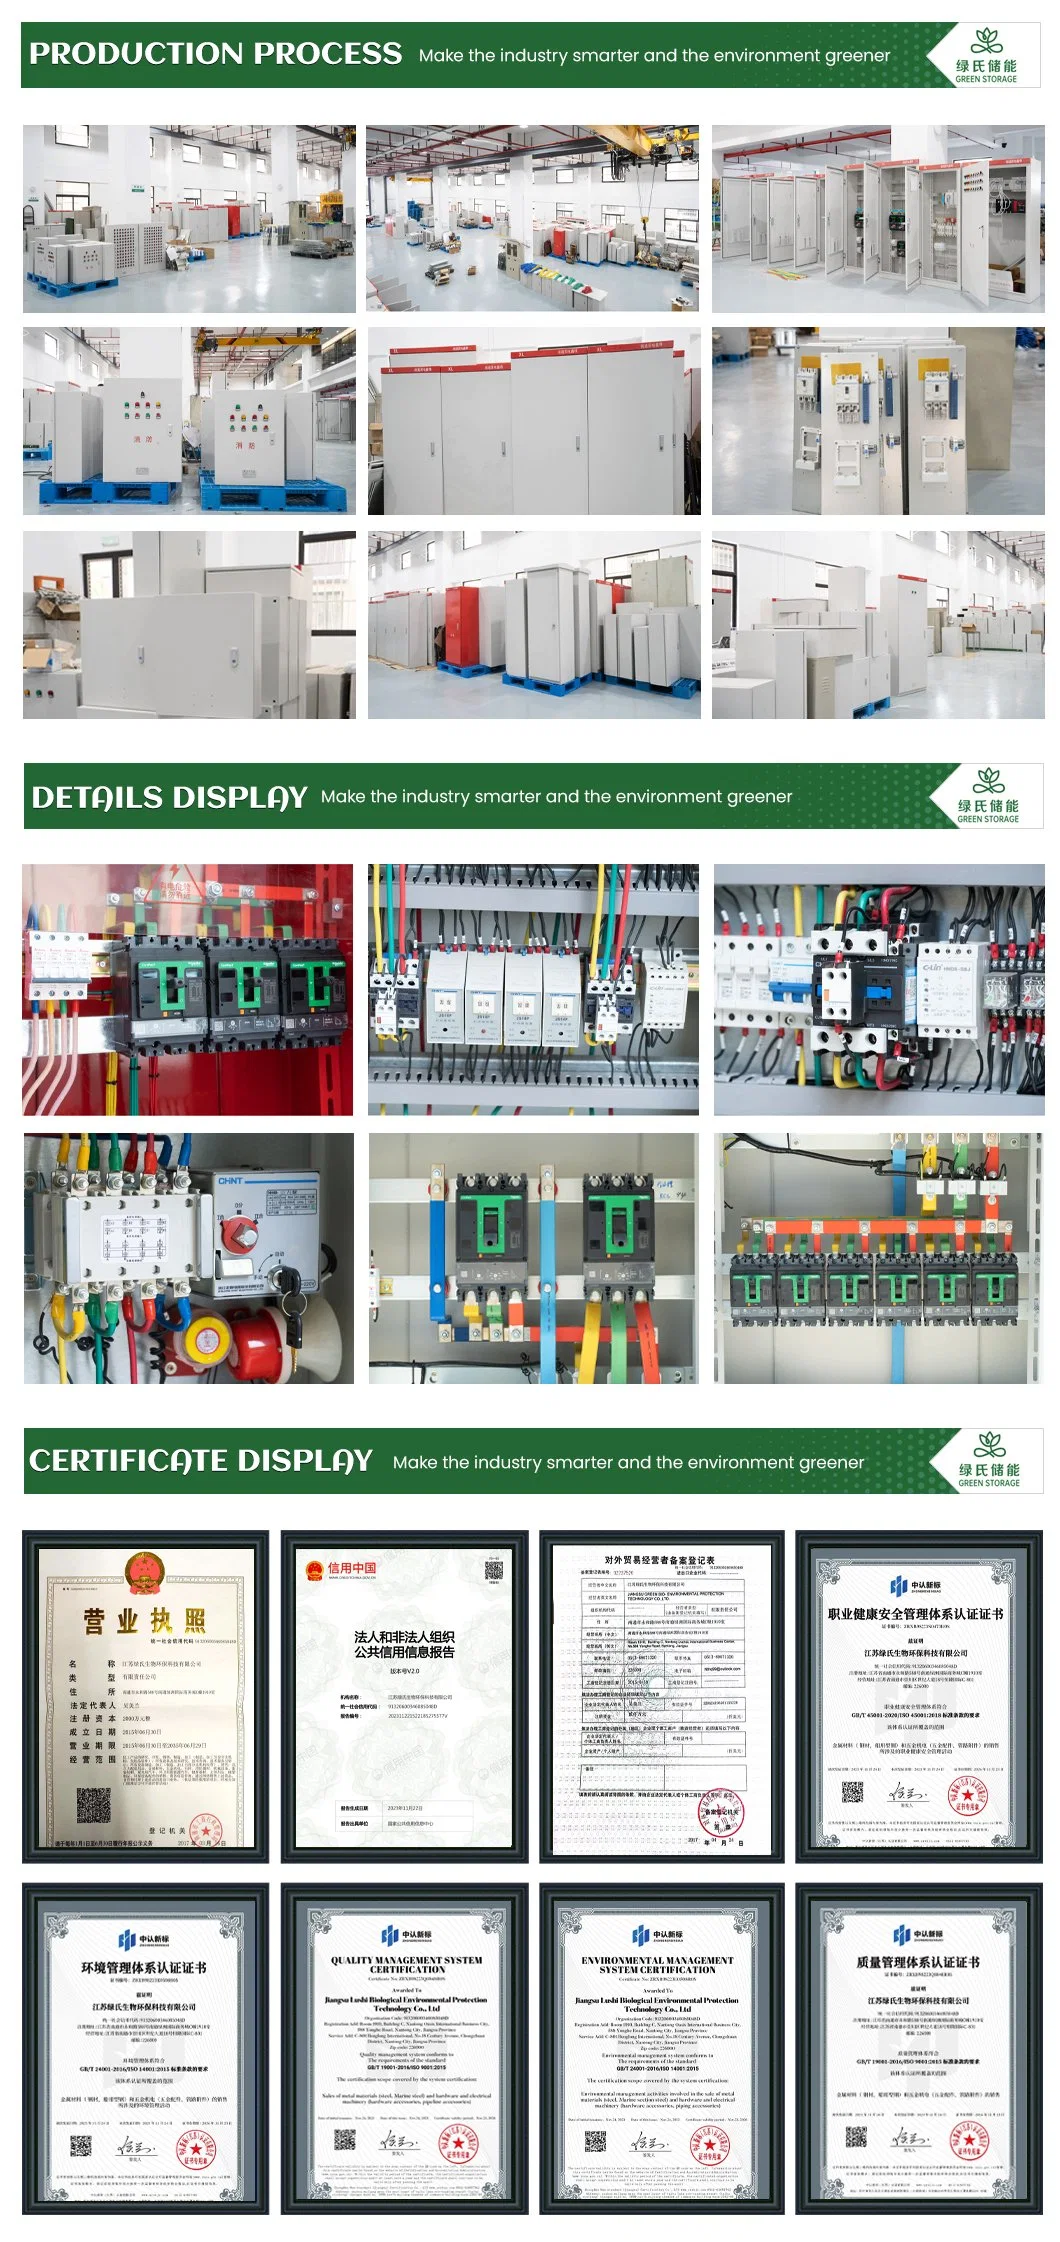 Green Storage Electric Power Equipment Fabricators China Auto Transfer Switch ATS Cabinet for Pharmaceutical